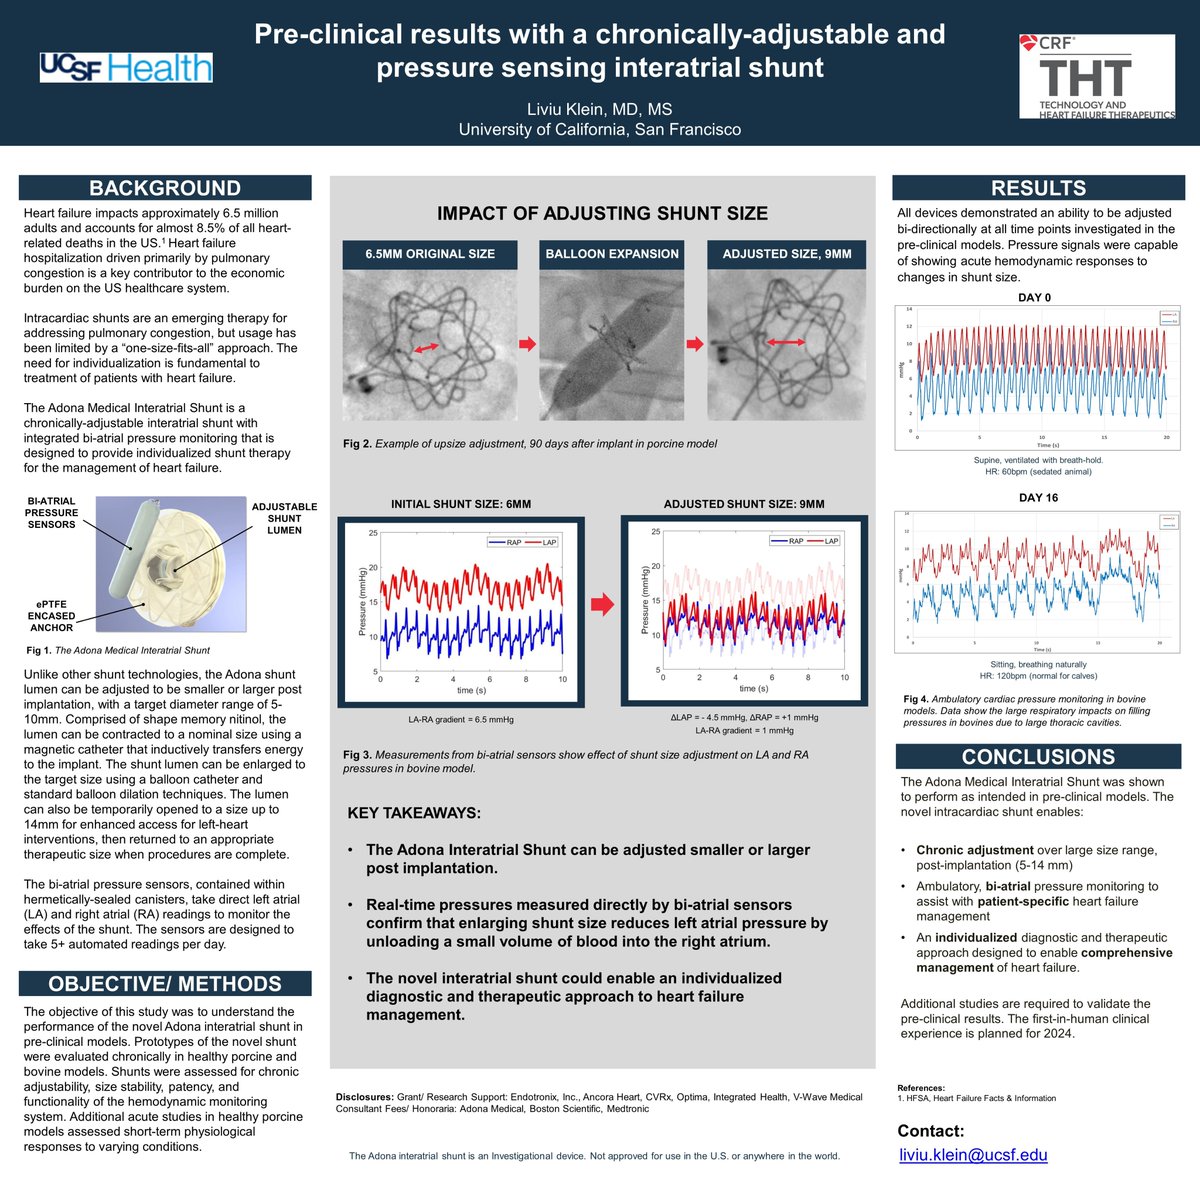 wrapping up #THT2024 here in Boston, truly one of the best meetings of the year. This year's event included a poster presentation of the latest Adona pre-clinical work by Dr. @LiviuKlein